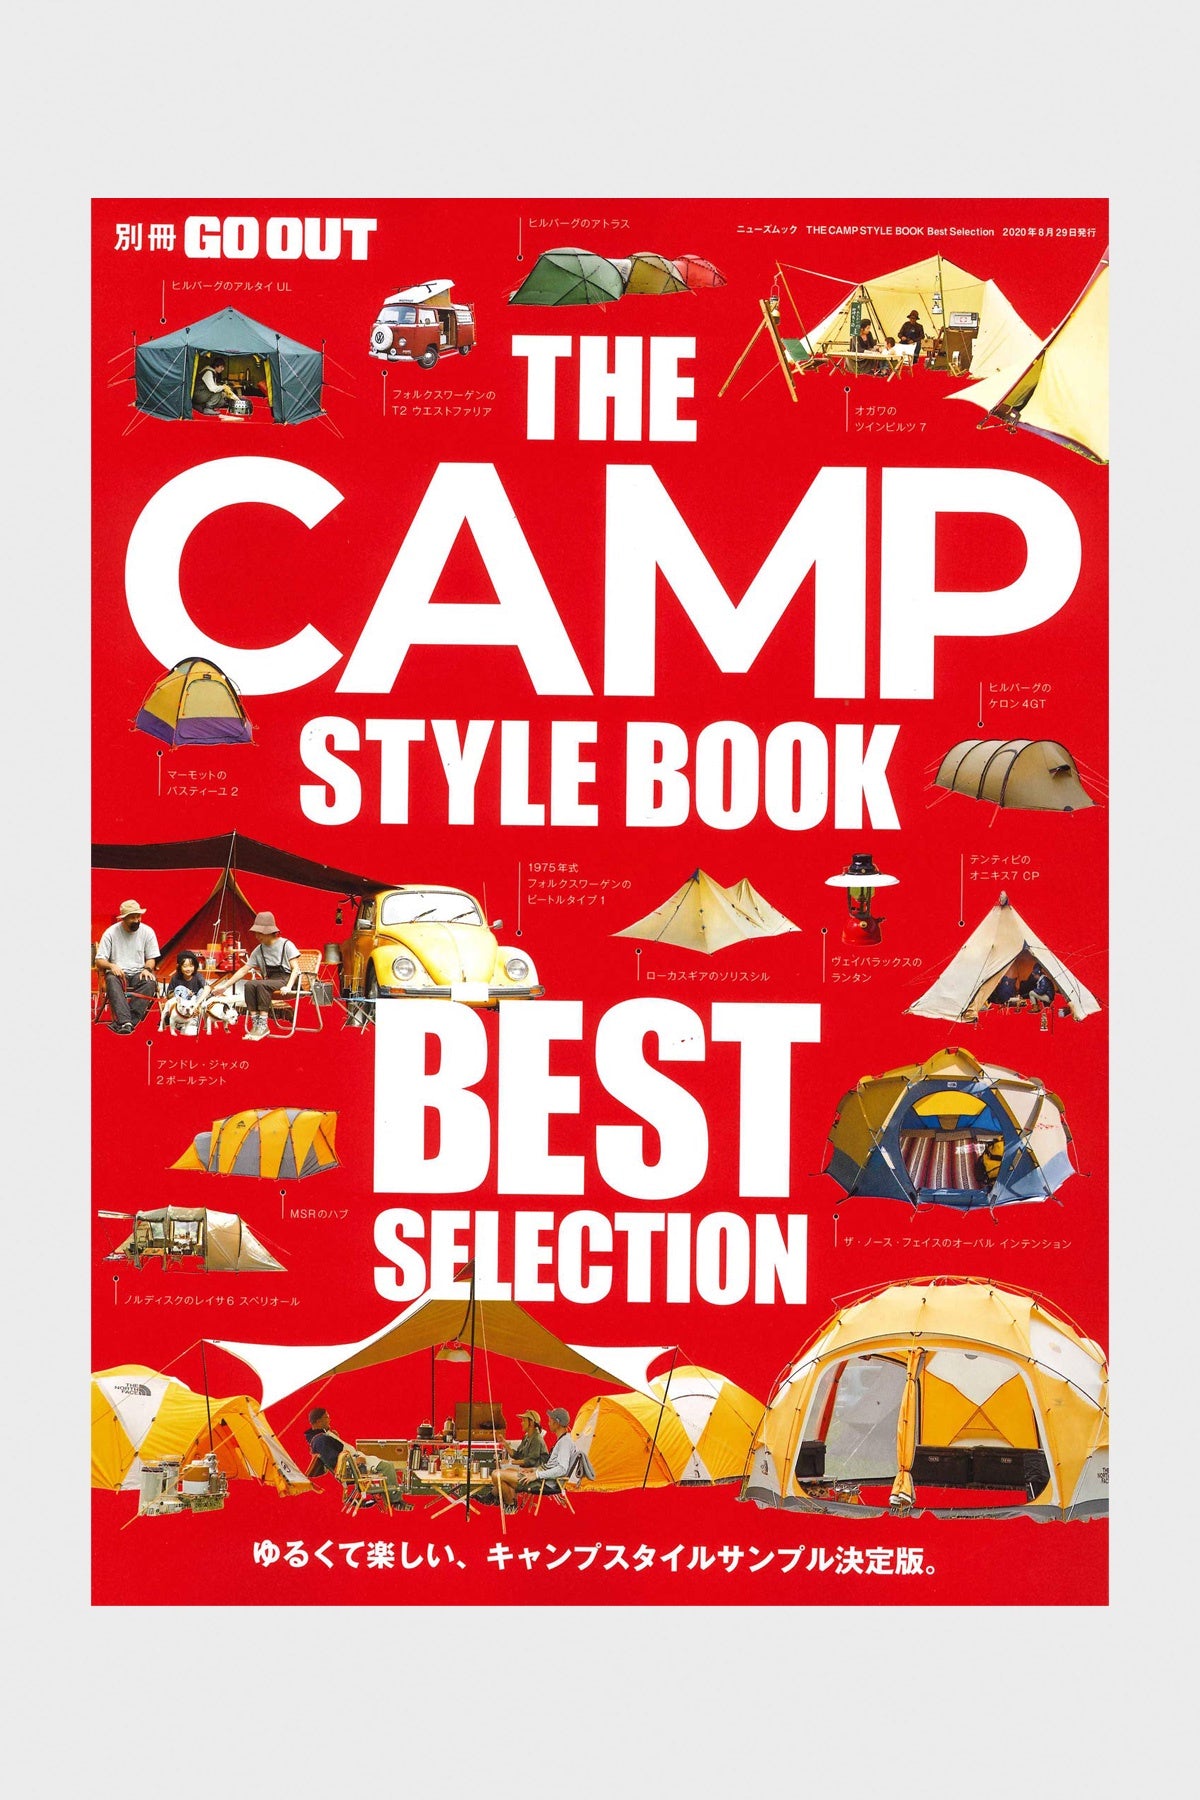 The Camp Style Book - Best Selection